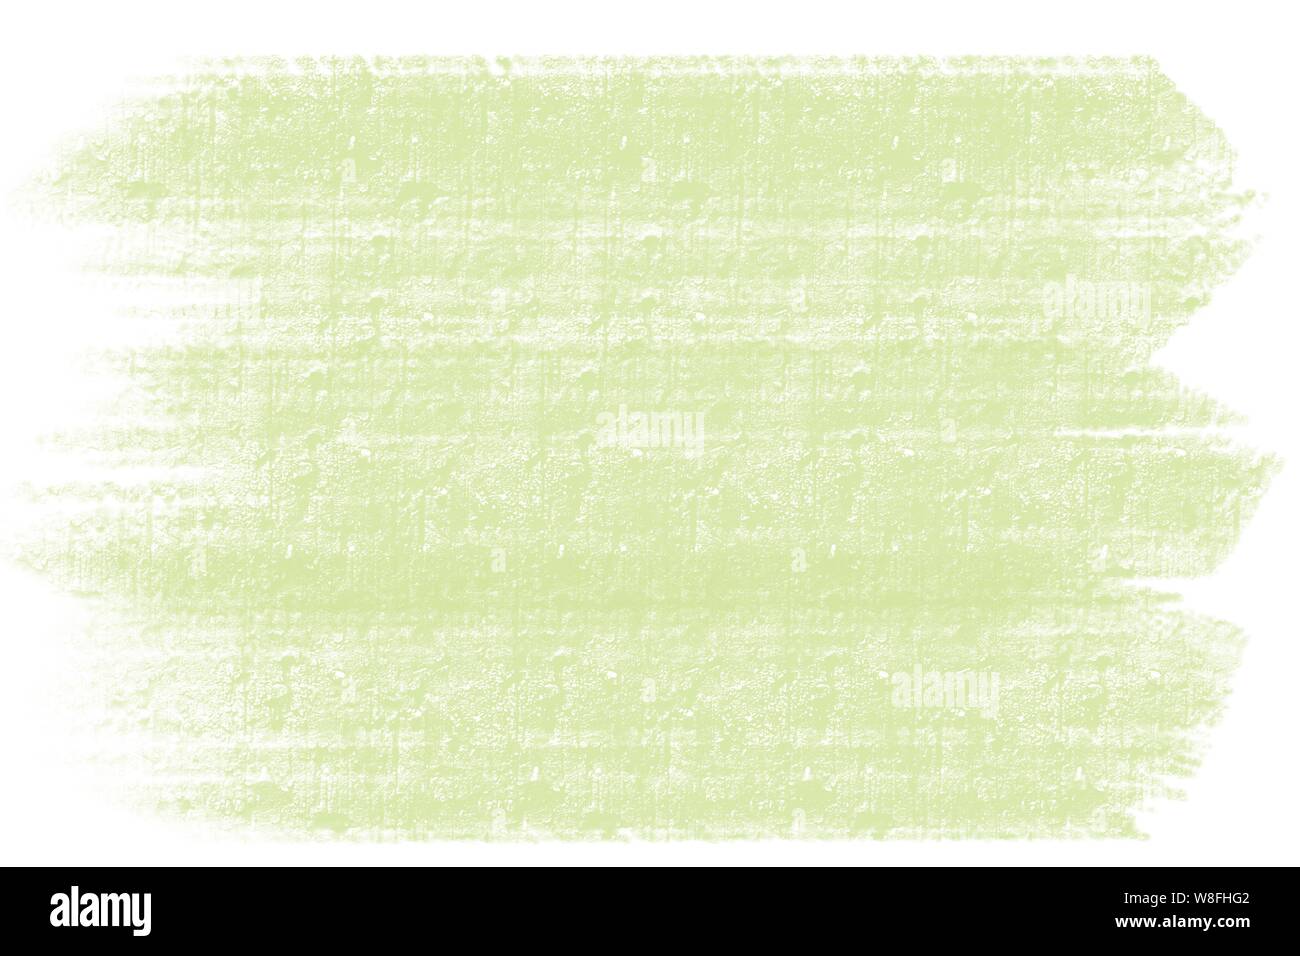 lime green hand drawn rough brush stroke cement wall tile background pattern with white borders Stock Photo